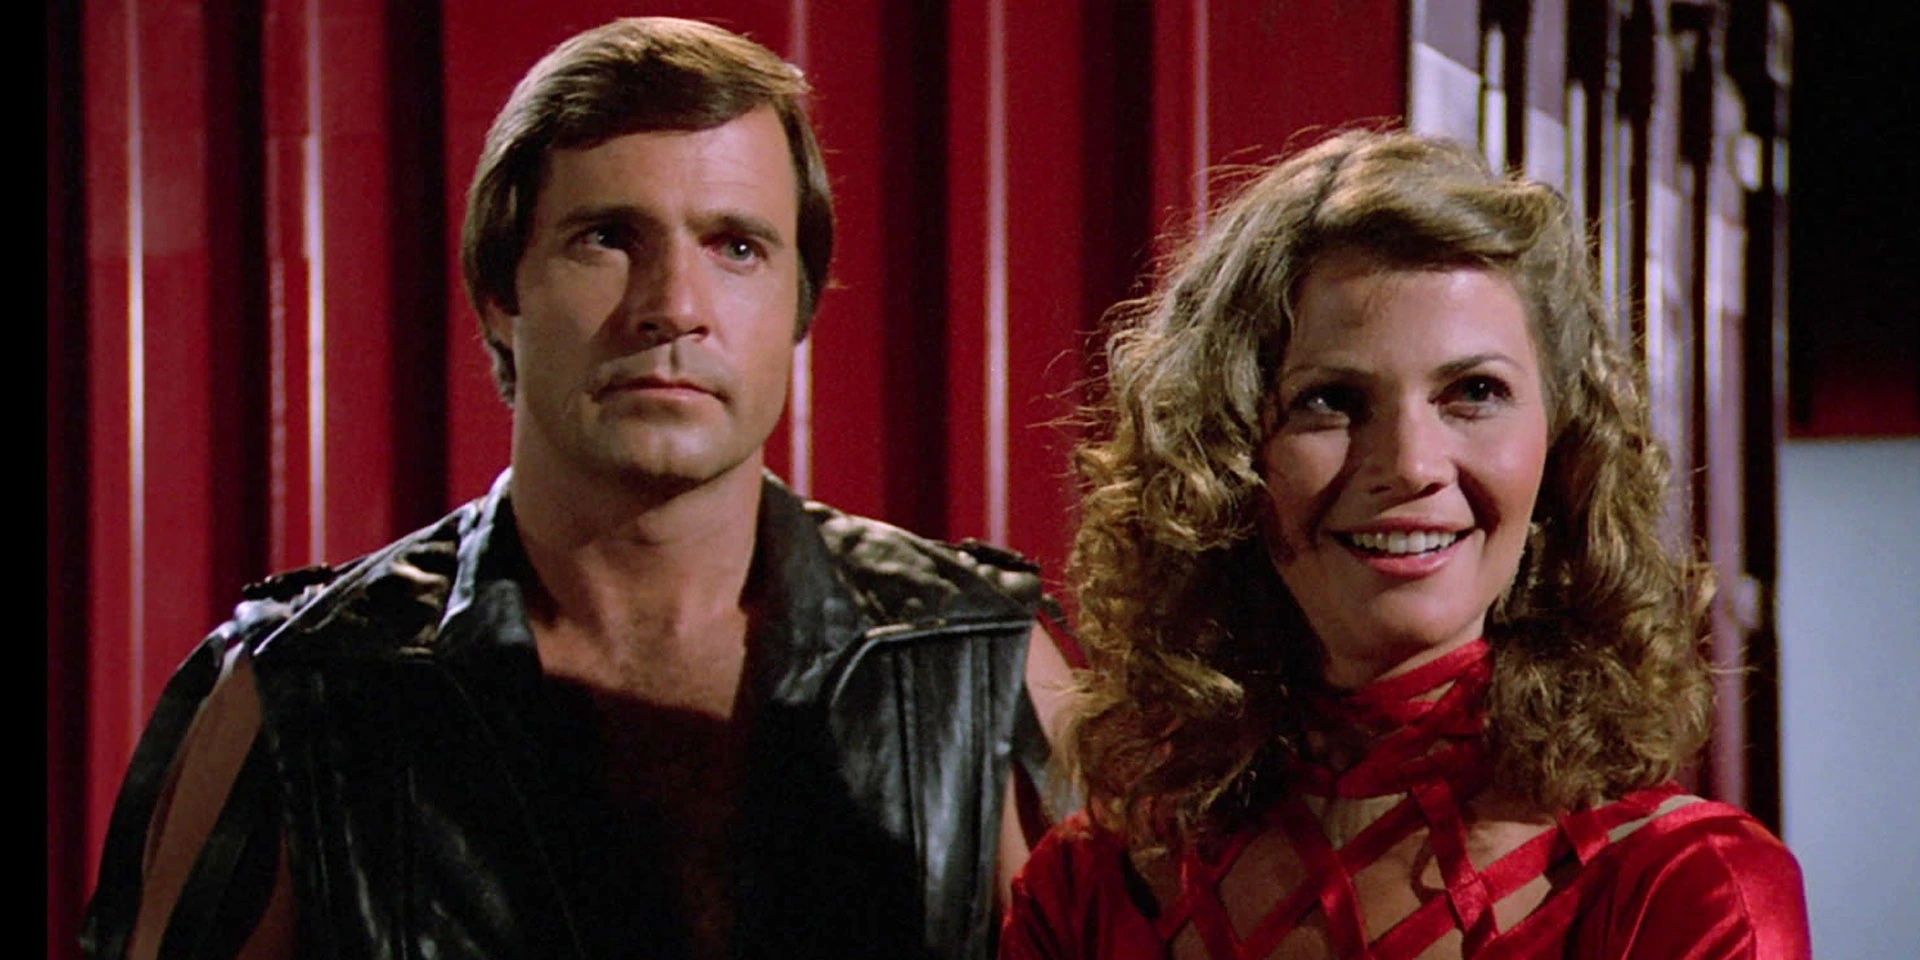 10 Best Episodes Of Buck Rogers In The 25th Century According To IMDb